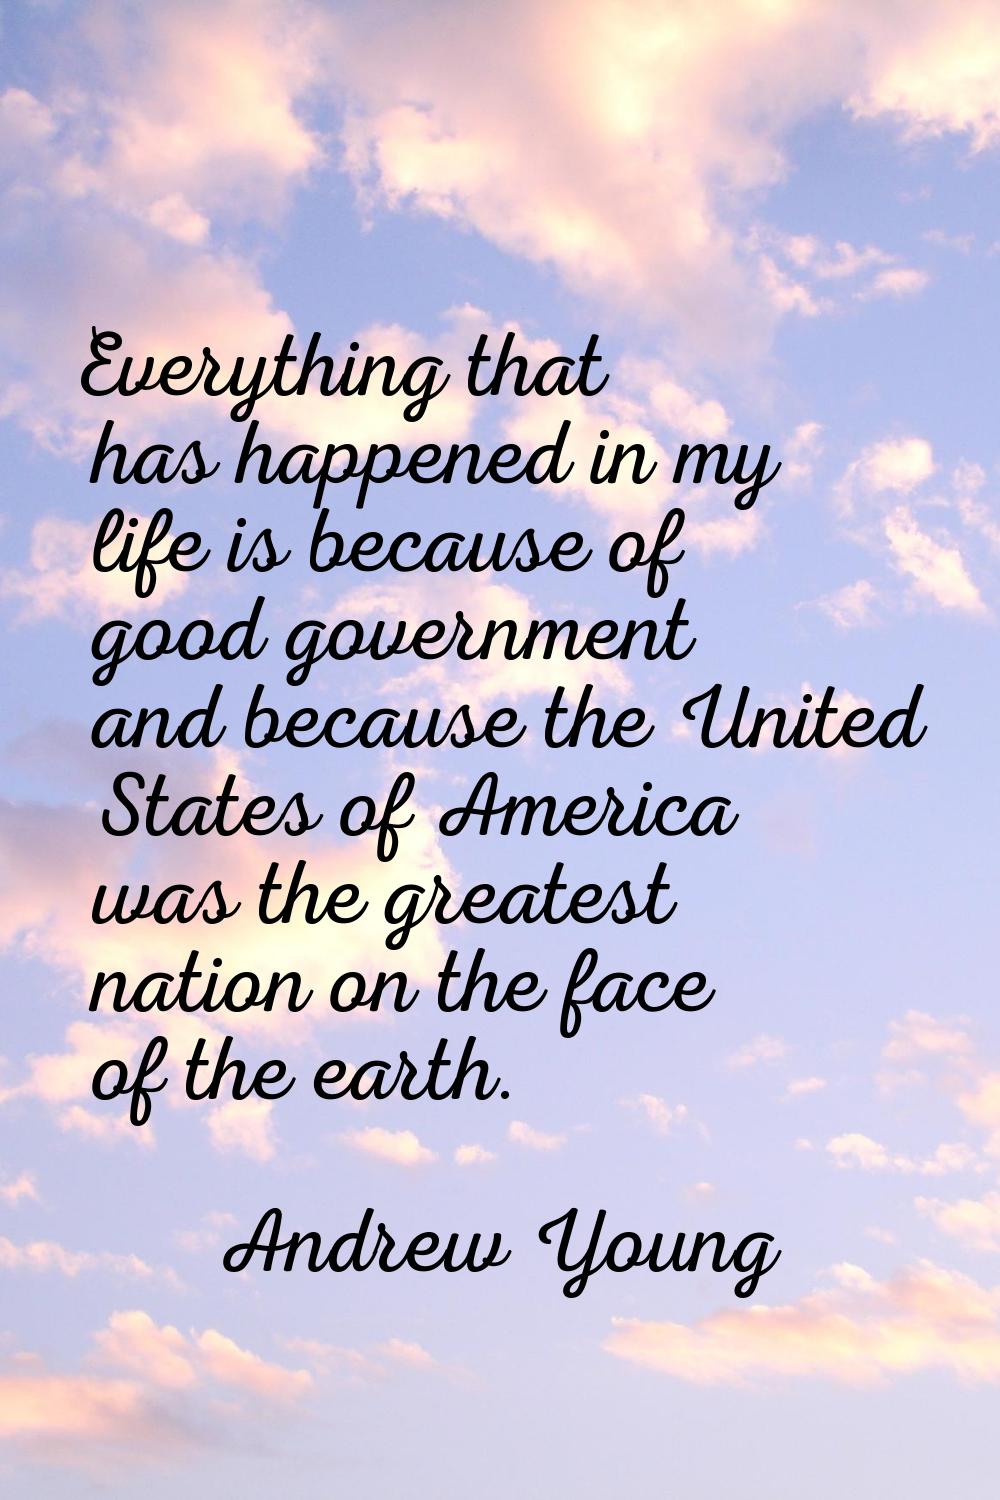 Everything that has happened in my life is because of good government and because the United States